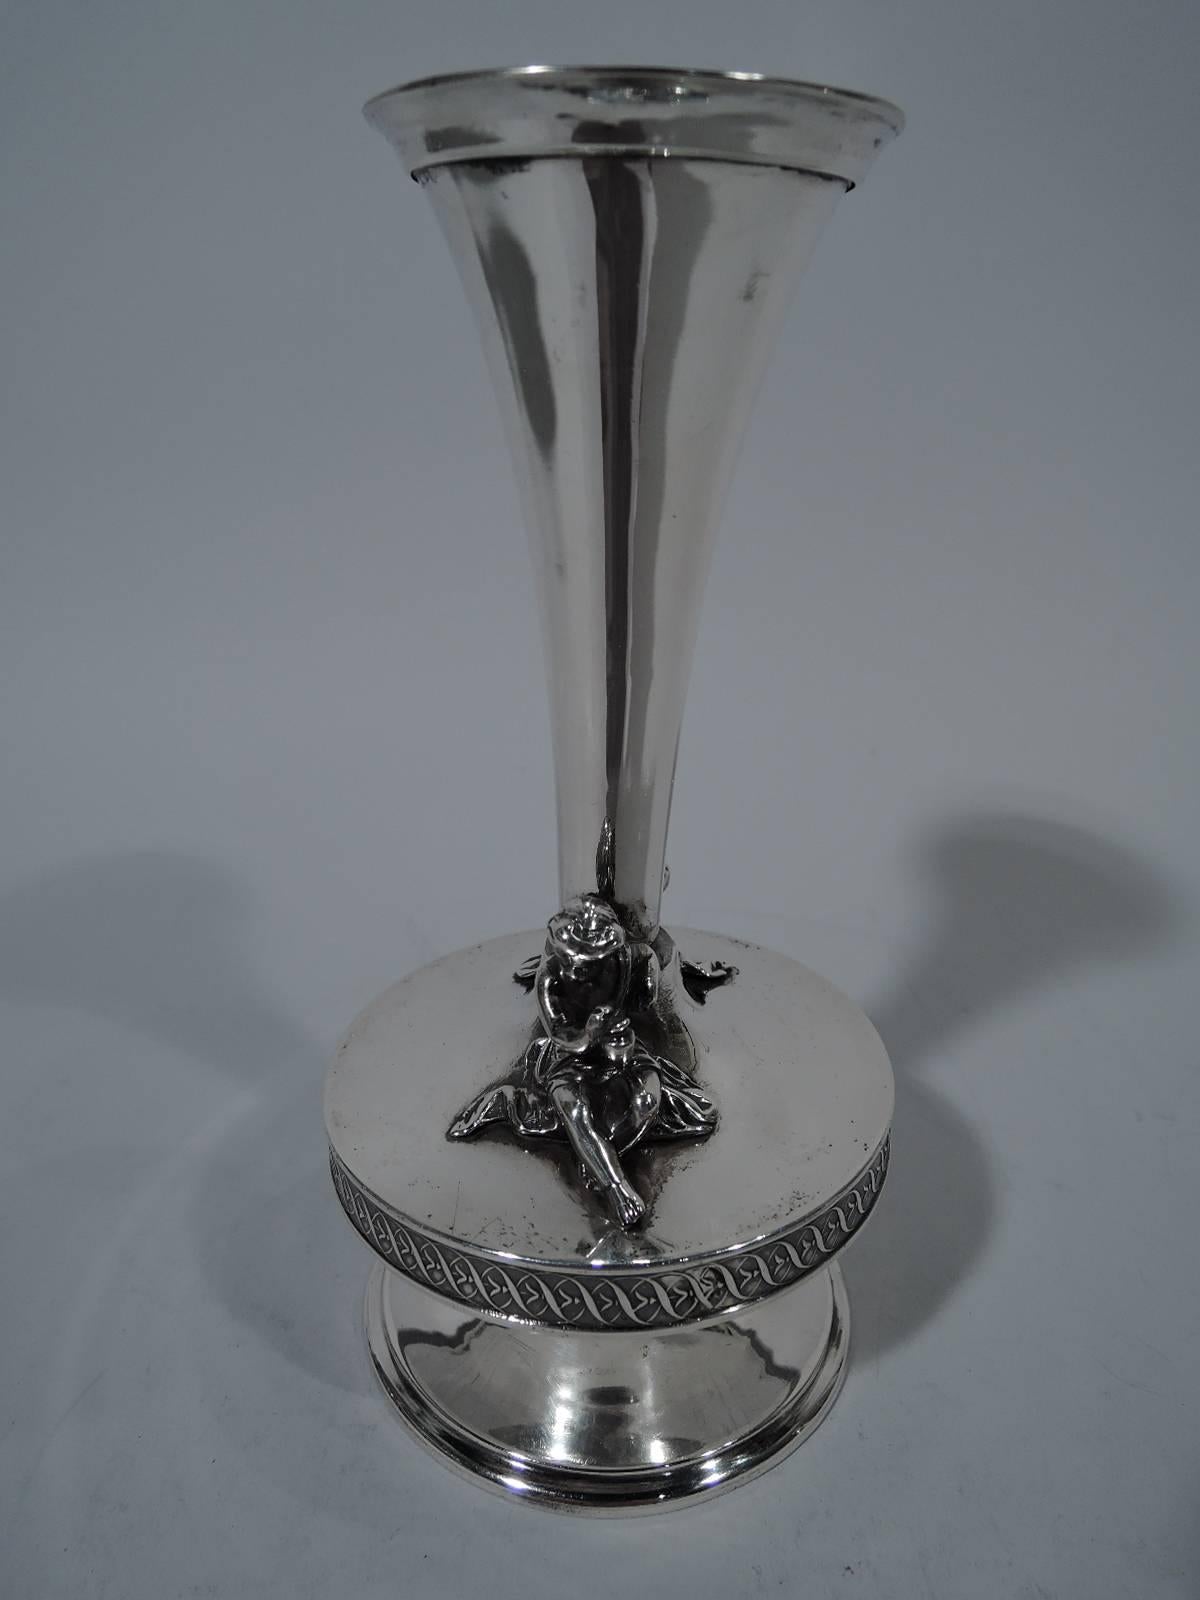 Classical coin silver vase. Made by Gorham in Providence, circa 1860. Conical with raised and spread foot. Bellied “platform” has two cast figures of seated and adroitly draped cherubs. Rinceaux band. Hallmark includes no. 610. Weight: 9.6 troy